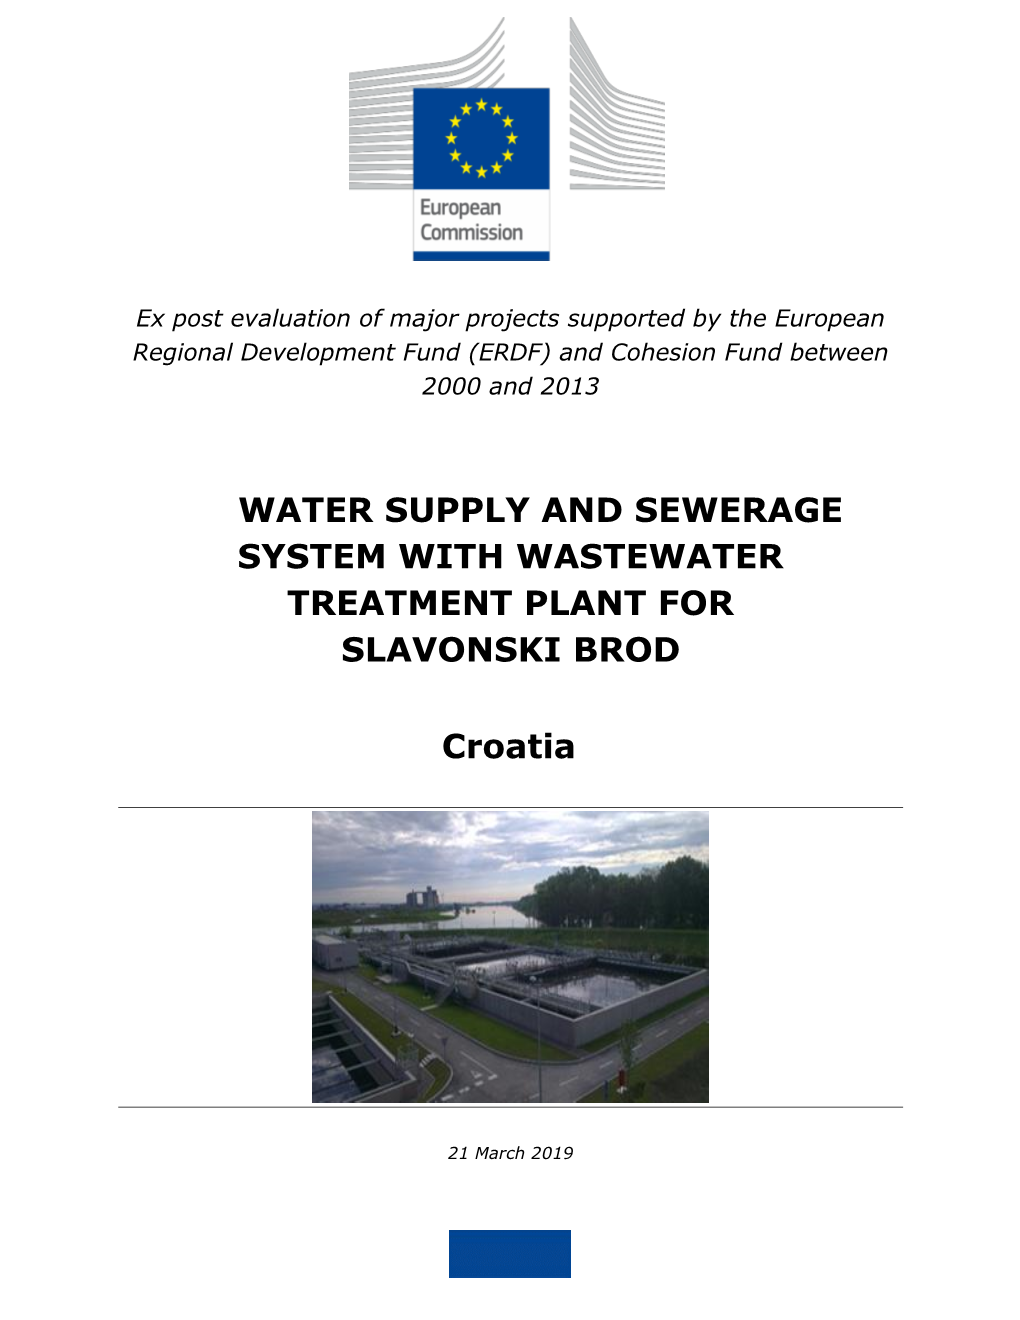 Water Supply and Sewerage System with Wastewater Treatment Plant for Slavonski Brod